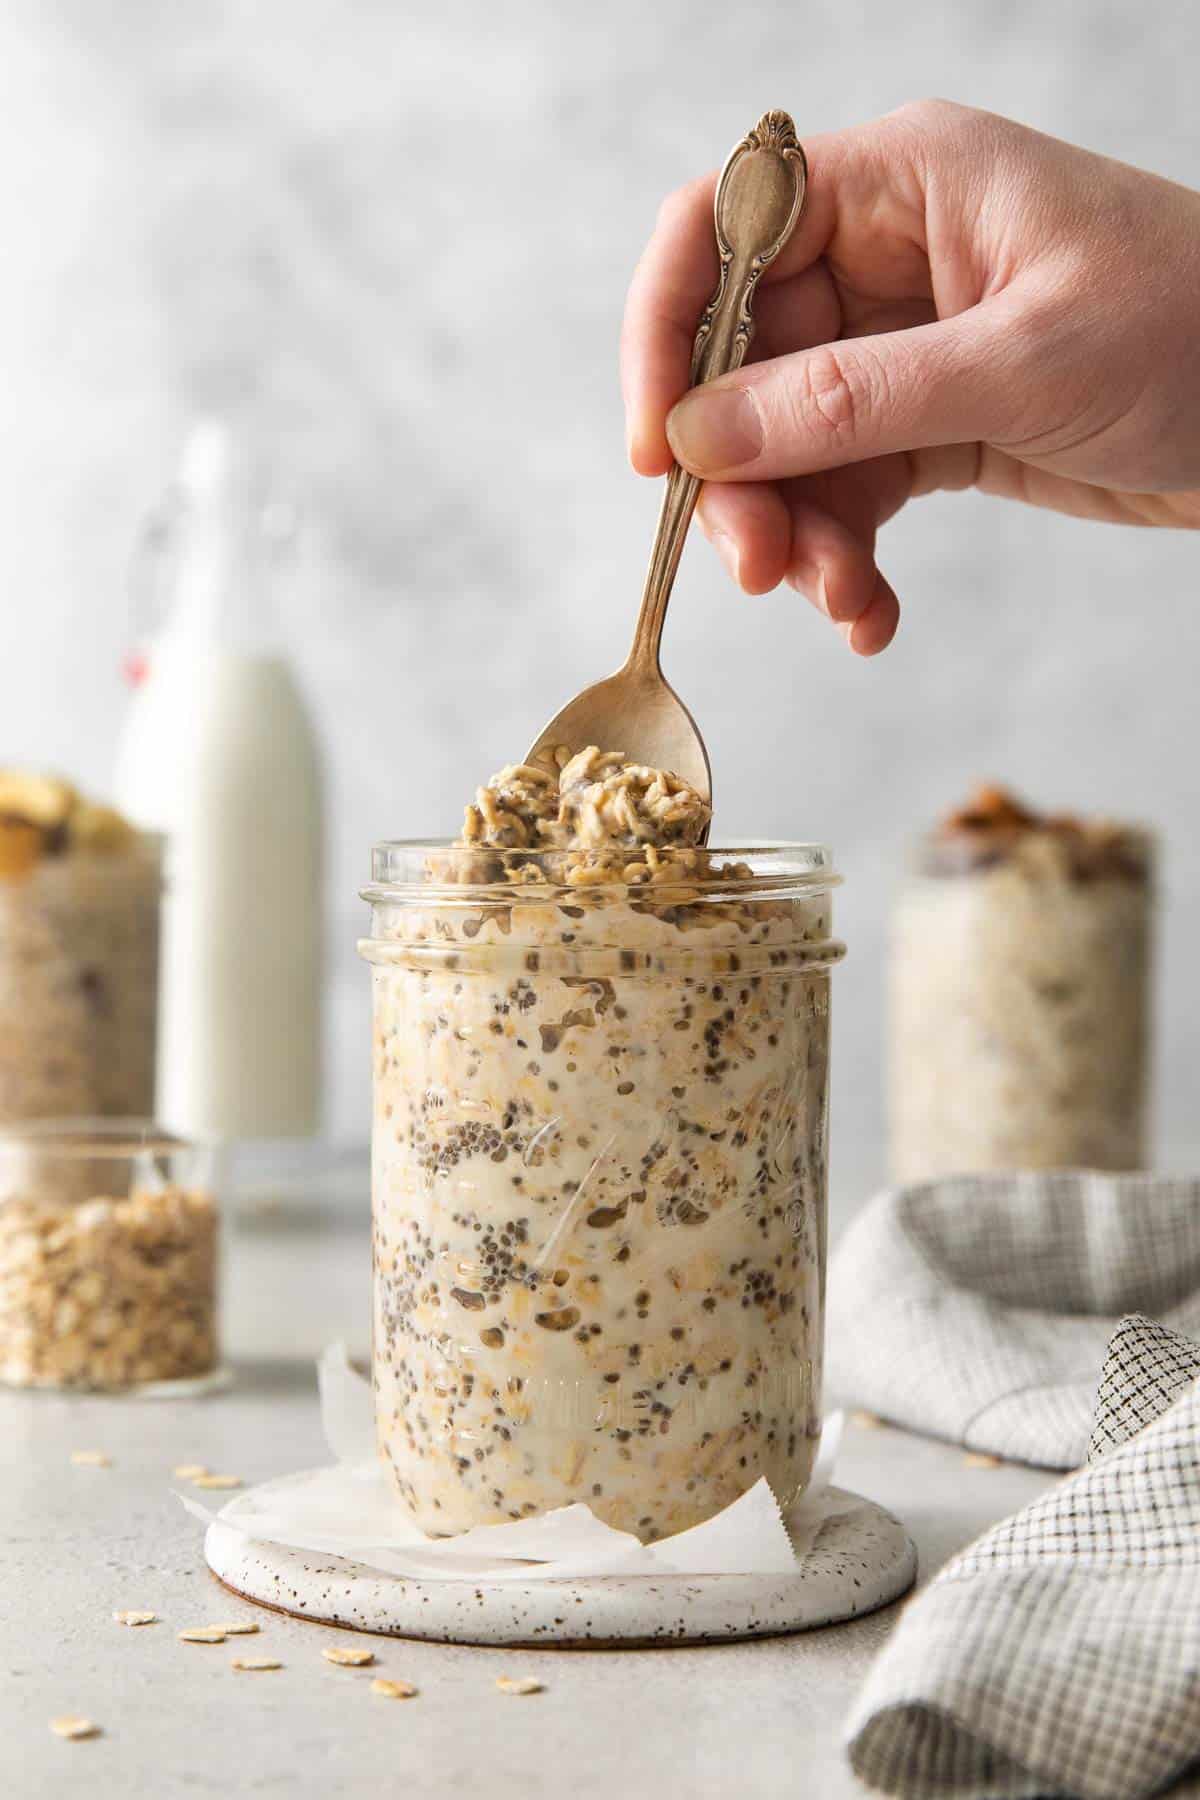 A side view of gluten-free overnight oats in a mason jar, with a hand sticking a spoon in the top